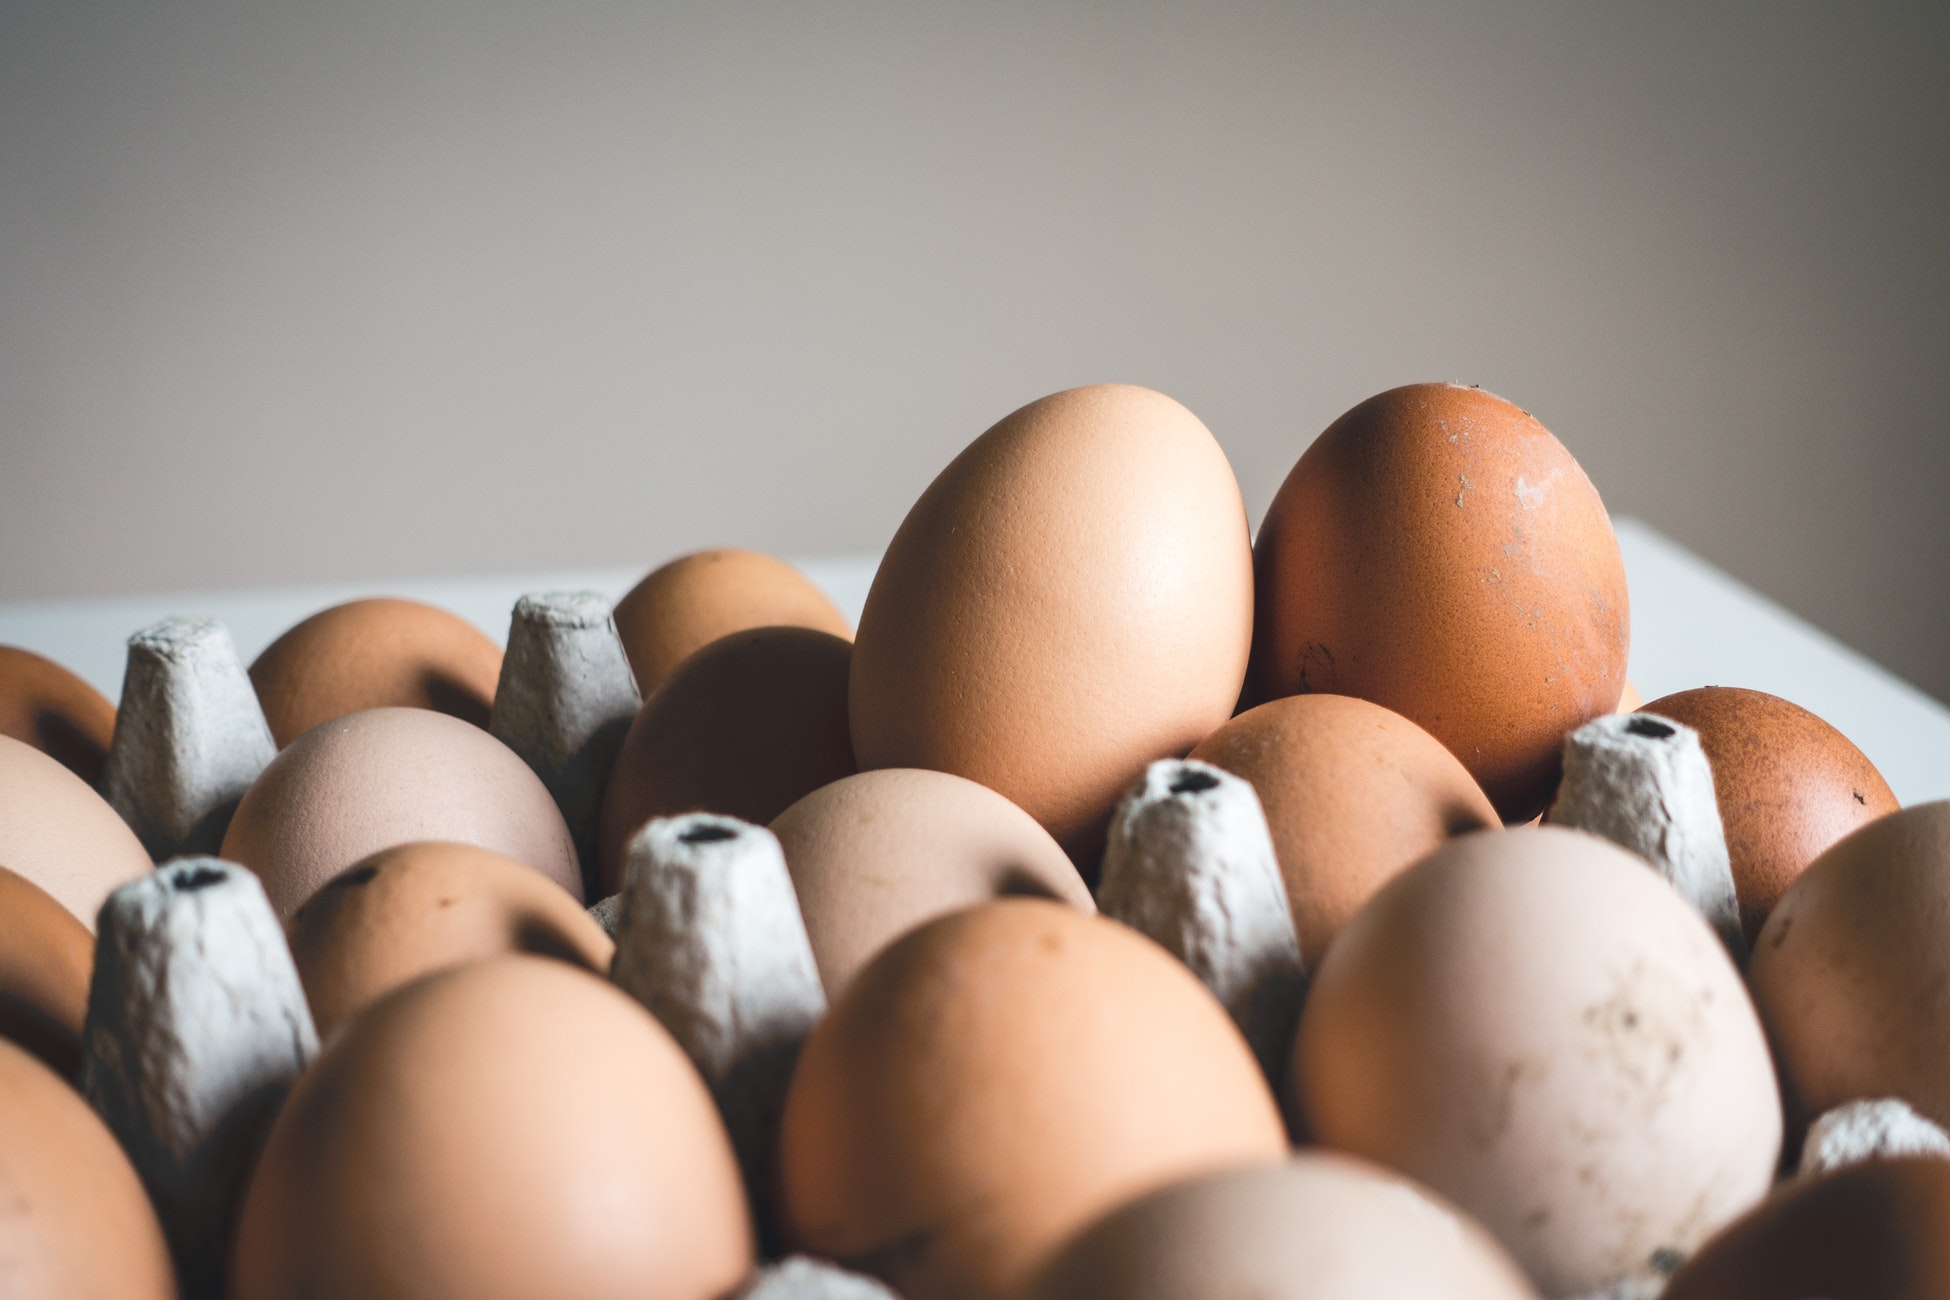 ENTITY shares 7 DIY masks and includes dermatologist commentary on ingredients such as egg whites. PHOTO OF EGGS VIA UNSPLASH/@FOODIESFEED 